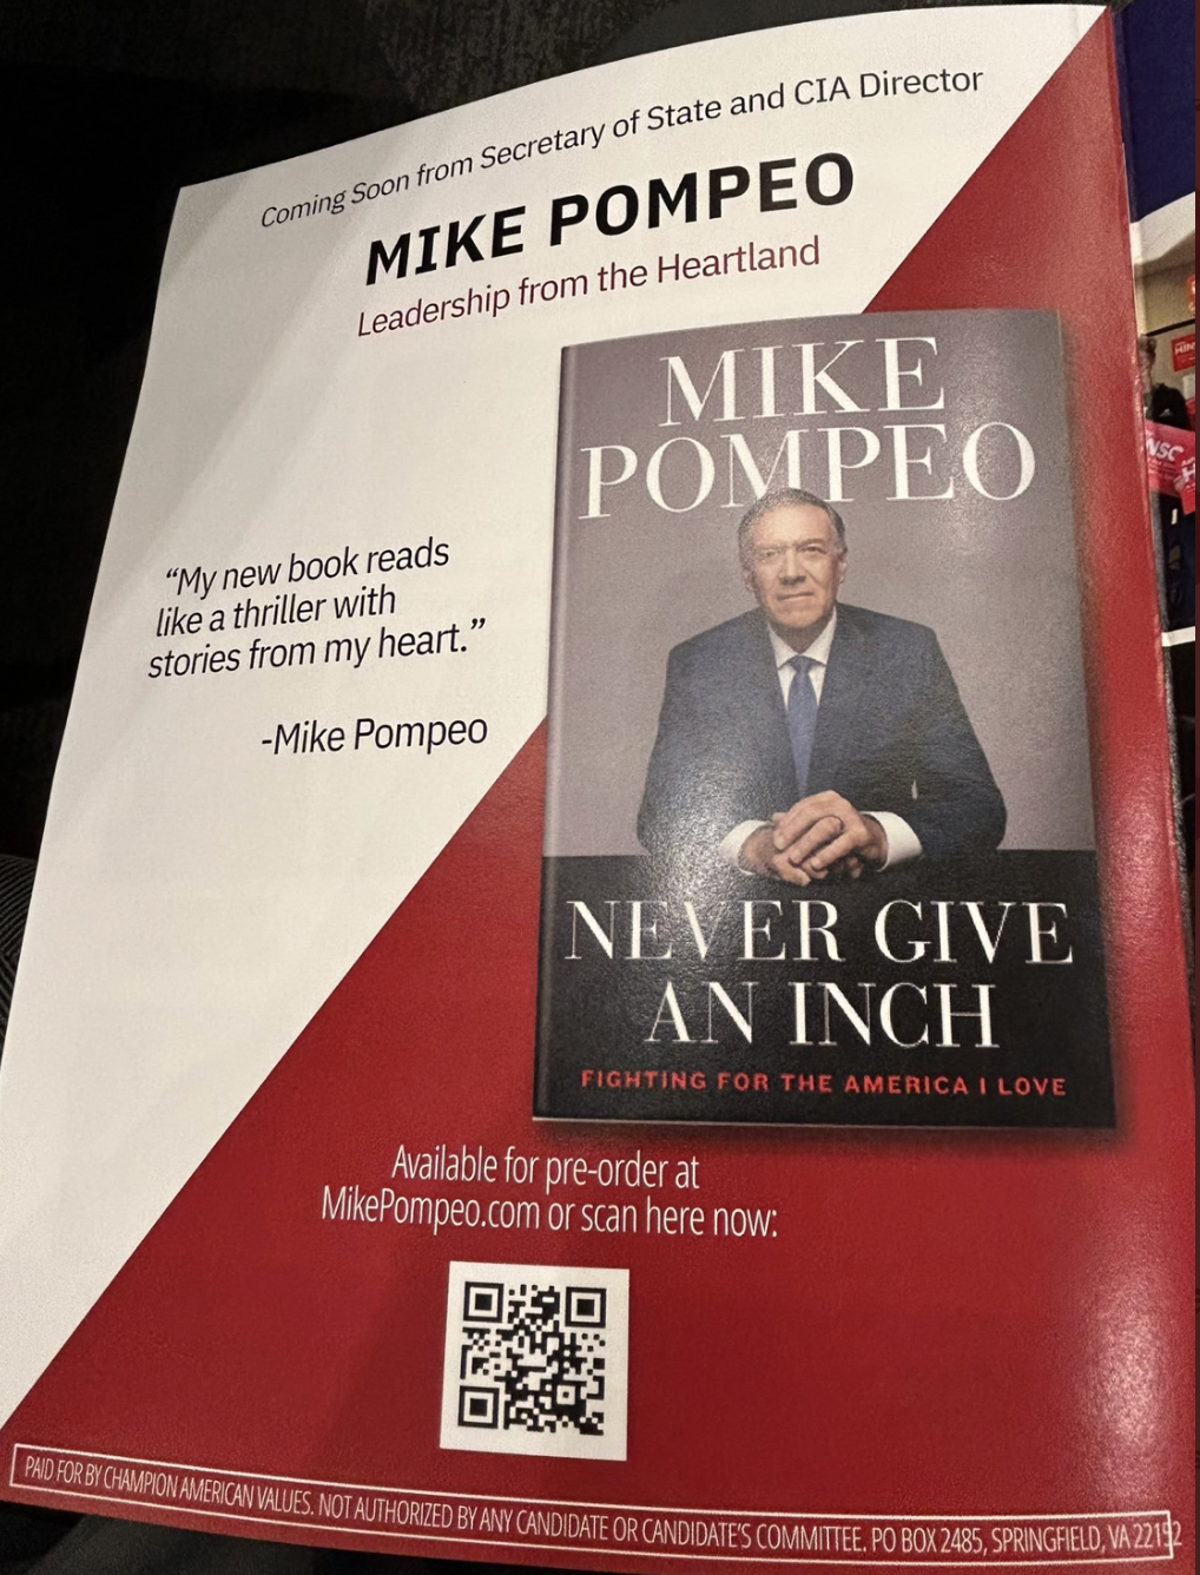 Mike Pompeo mocked for quoting himself to promote his new book